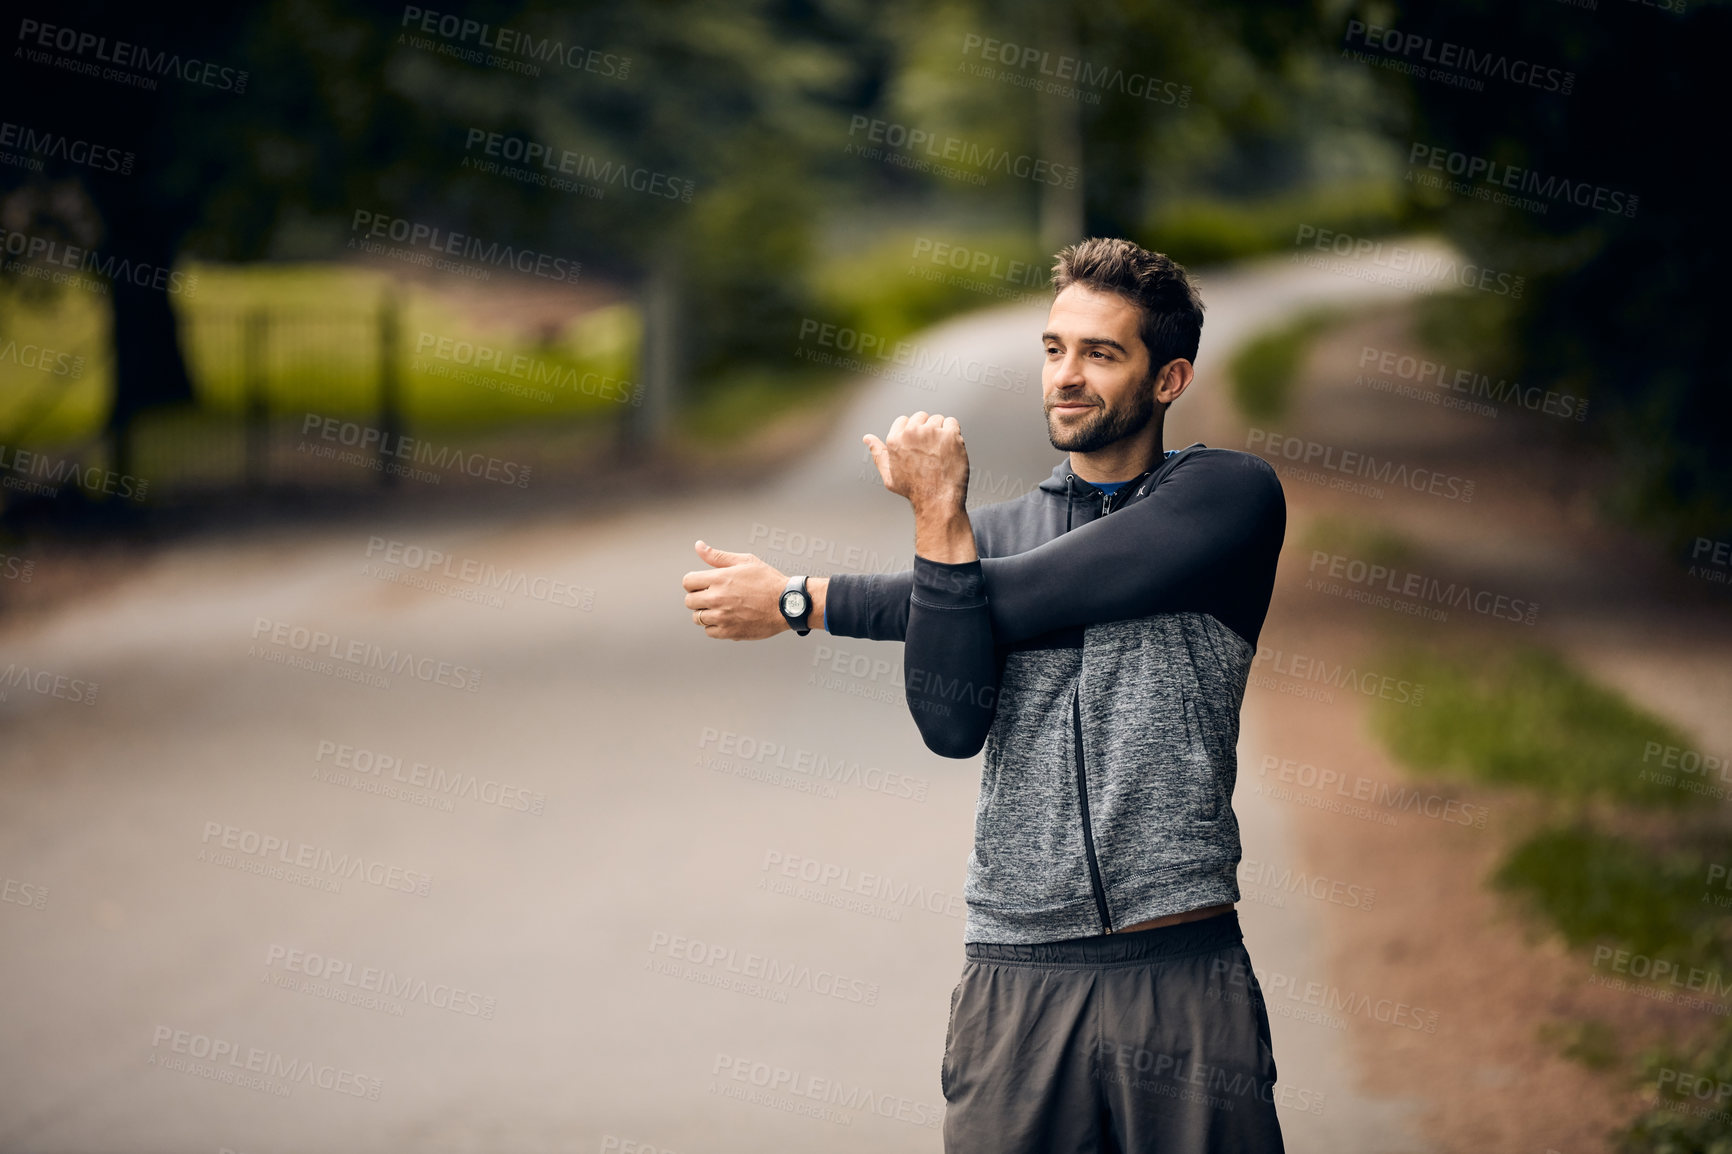 Buy stock photo Shot of a sporty man starting his exercise routine with stretching exercises